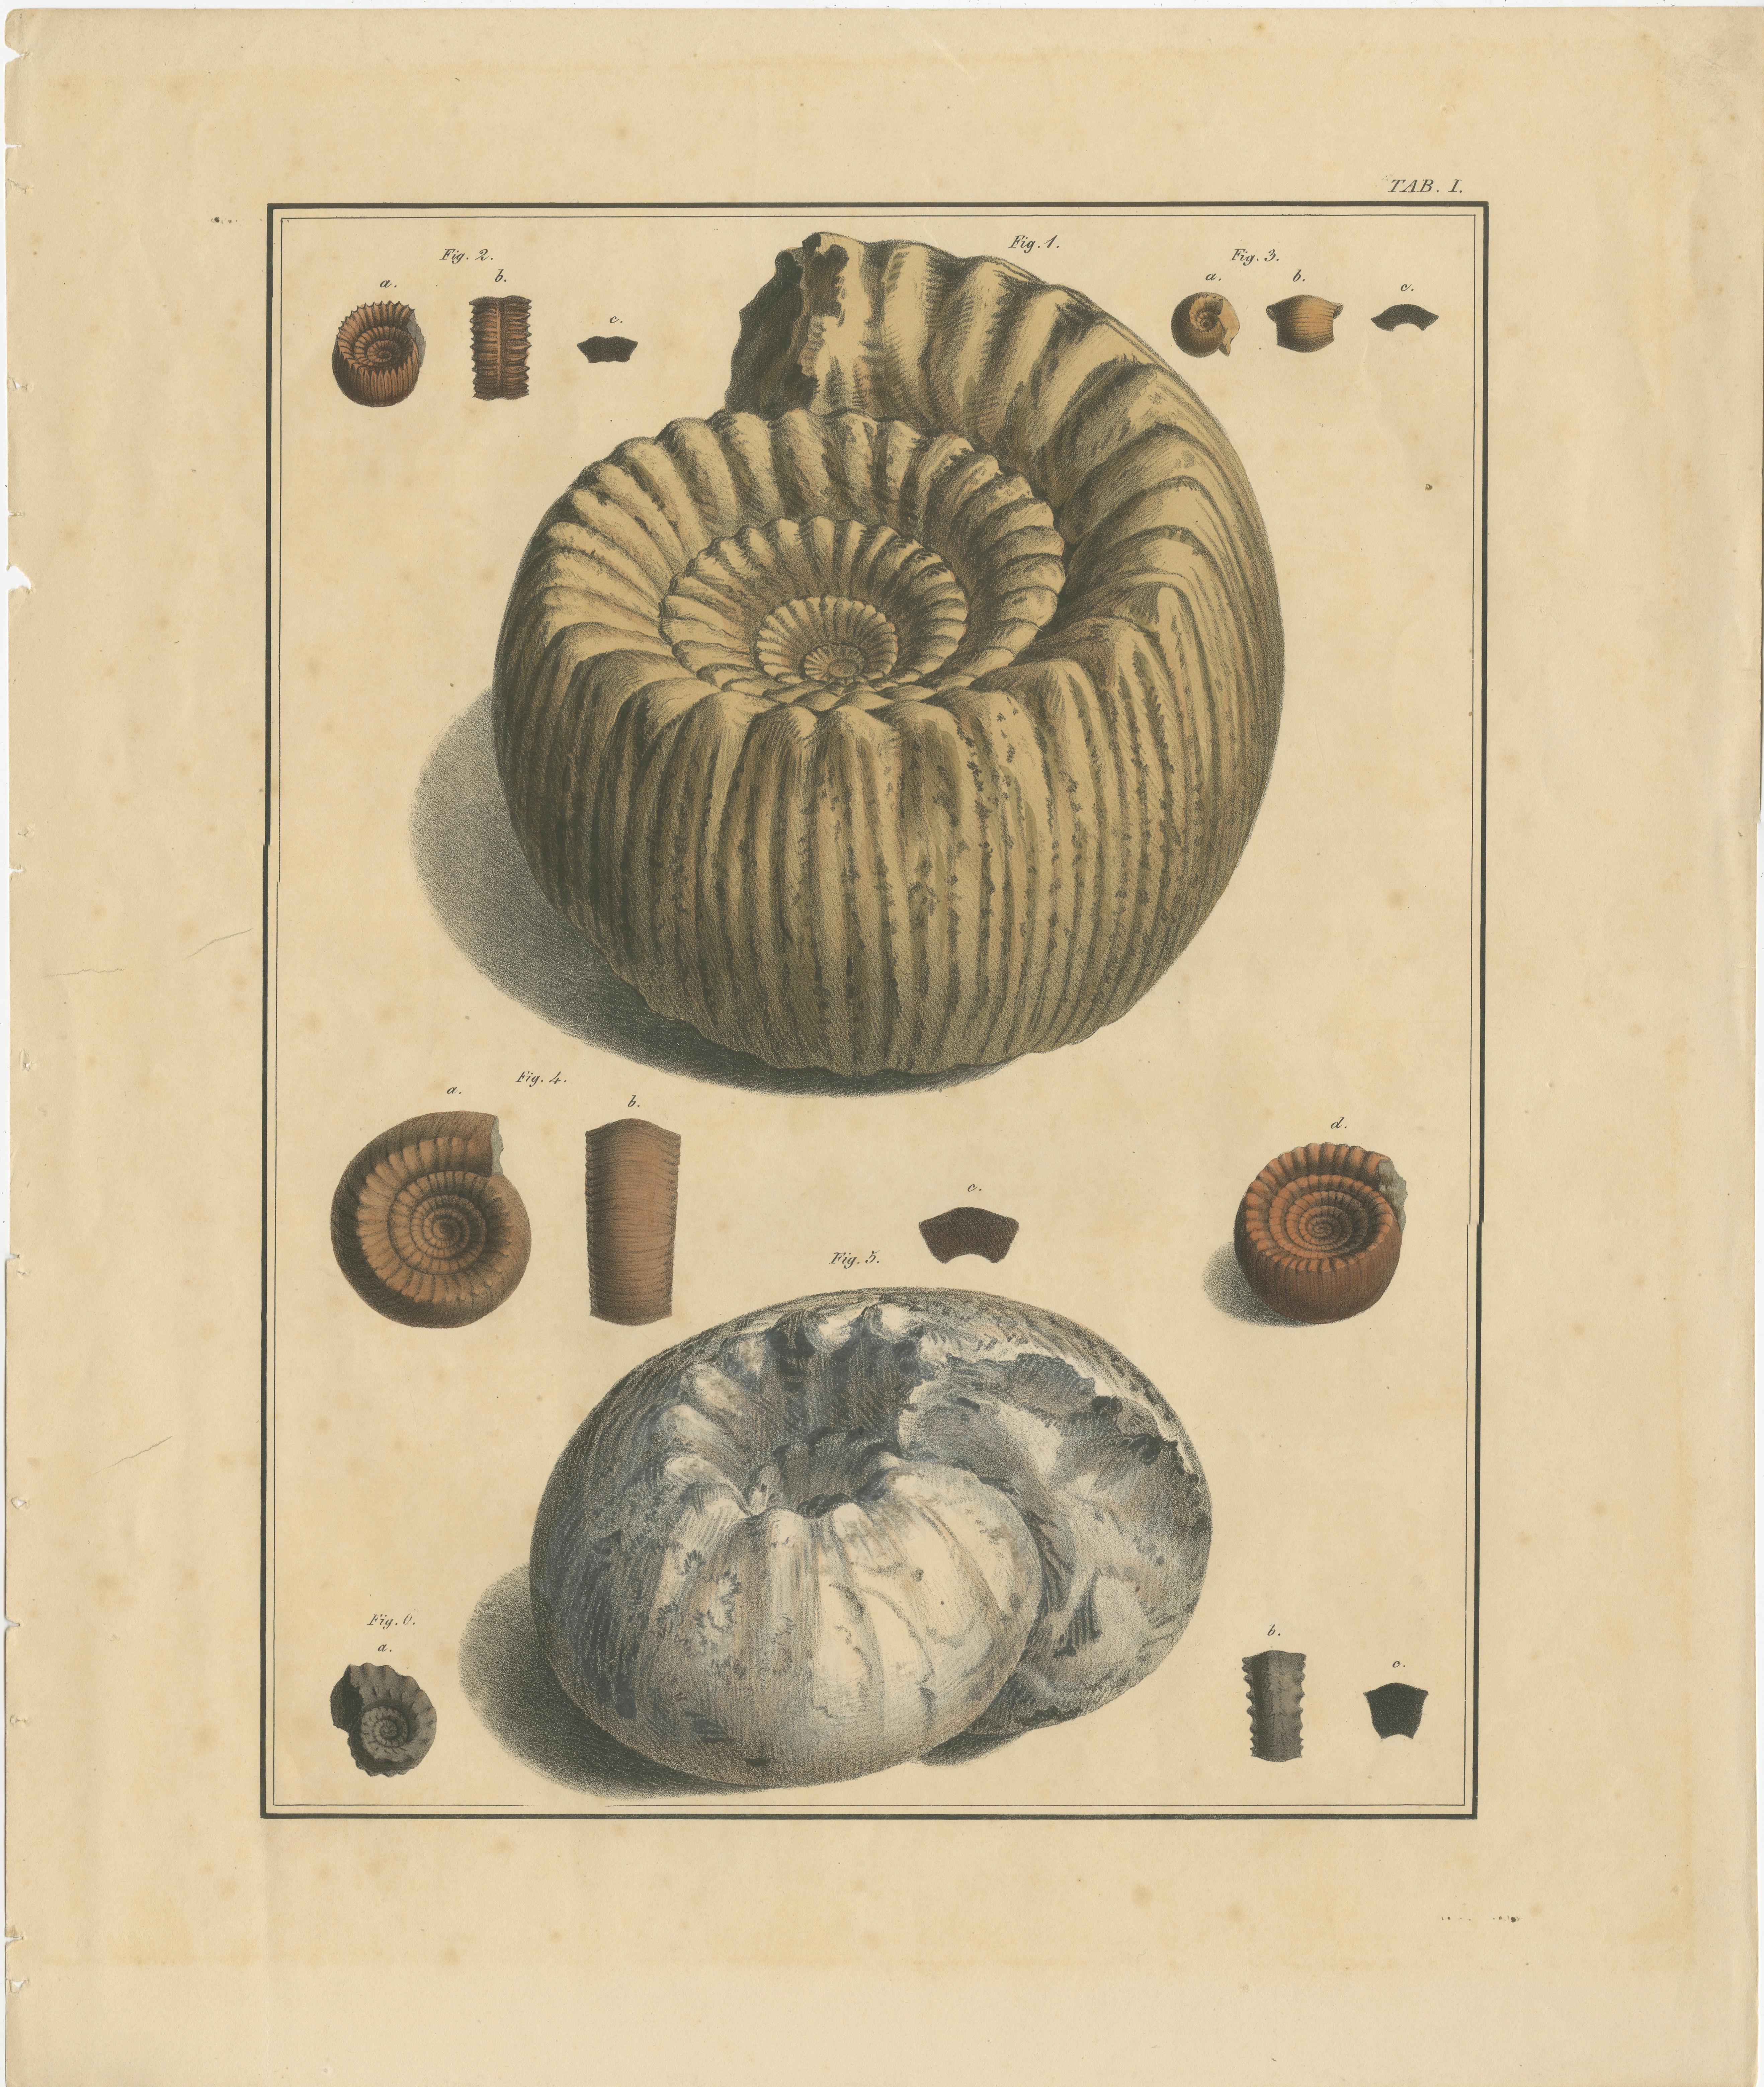 Set of two original antique prints of various fossils. Source unknown, to be determined. Published c.1840.